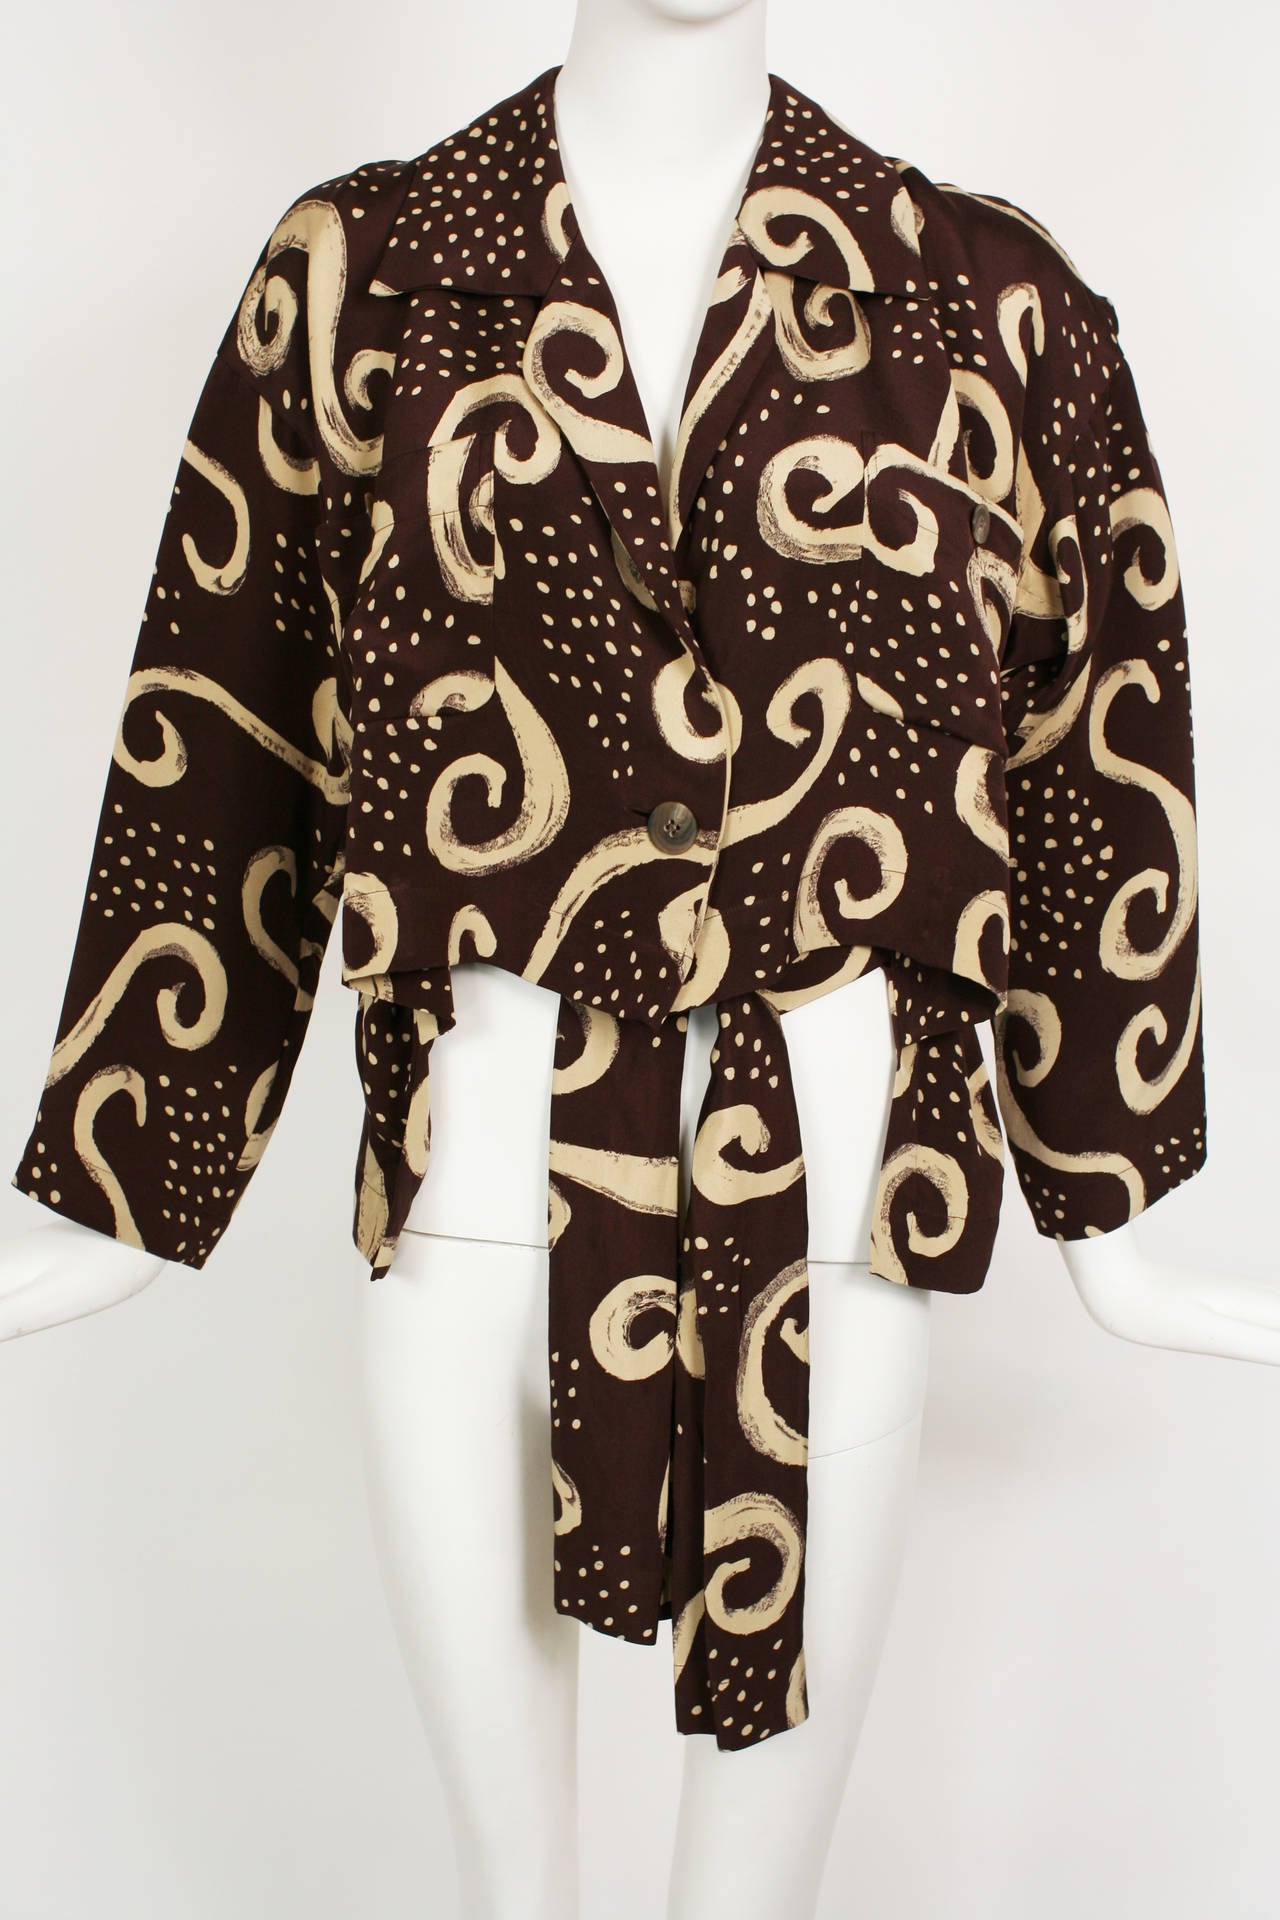 A fabulous and highly collectible Issey Miyake Brown and cream abstract print ensemble. The top has a high-low hem and could work as a light jacket or blouse. The top is doubled silk and has two breast pockets.  The walking shorts are high waisted